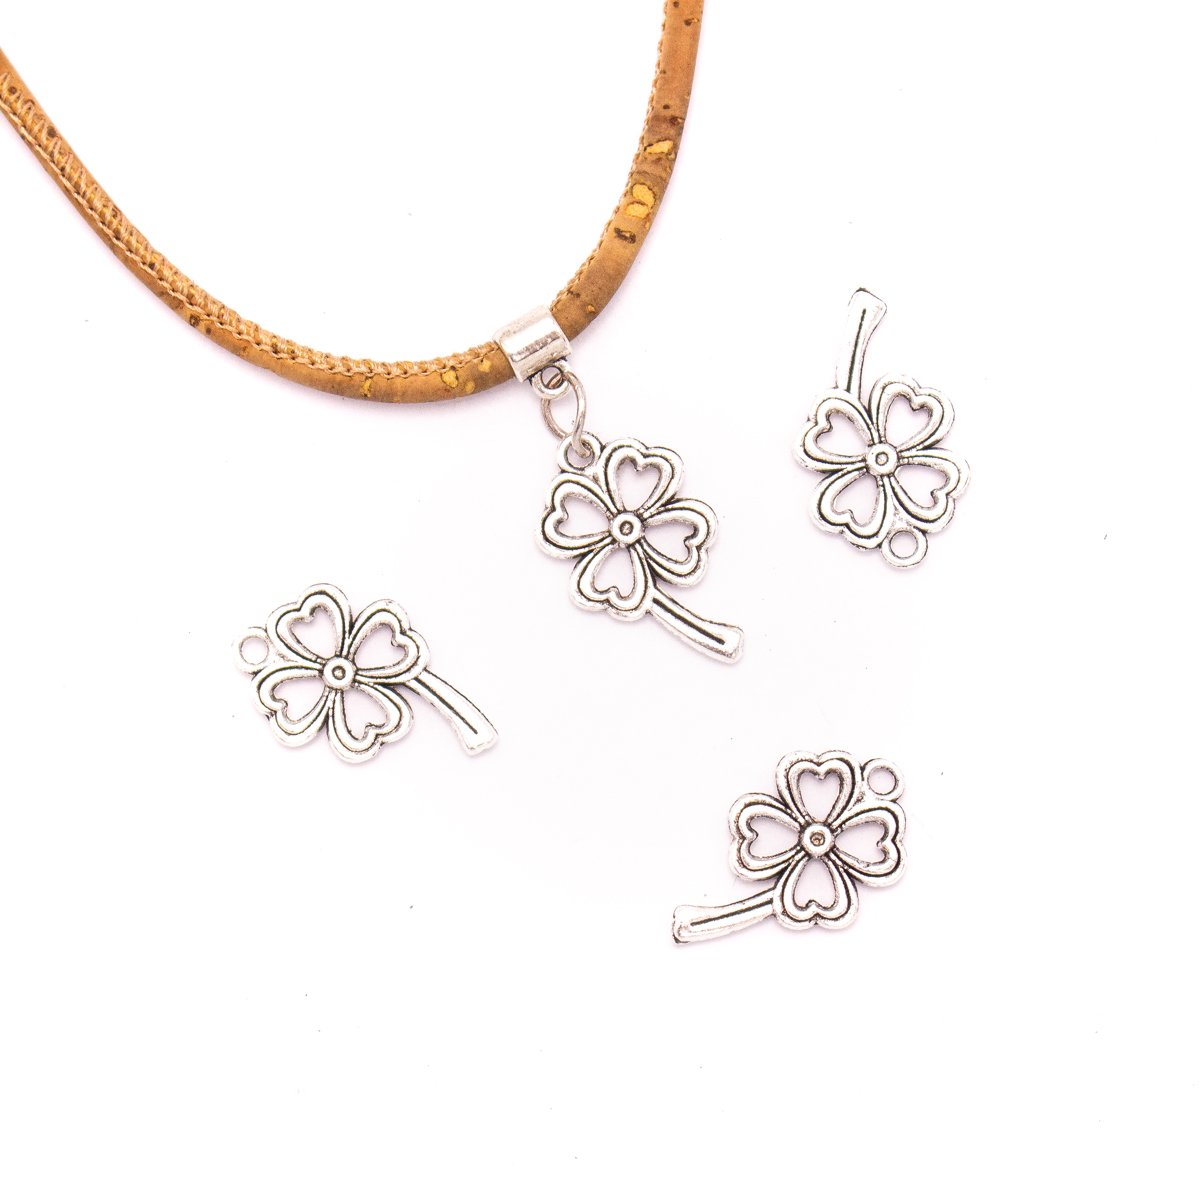 20 units 14x24mm Pendant antique silver Four leaf Clover jewelry pendant Jewelry Findings & Components D-3-408